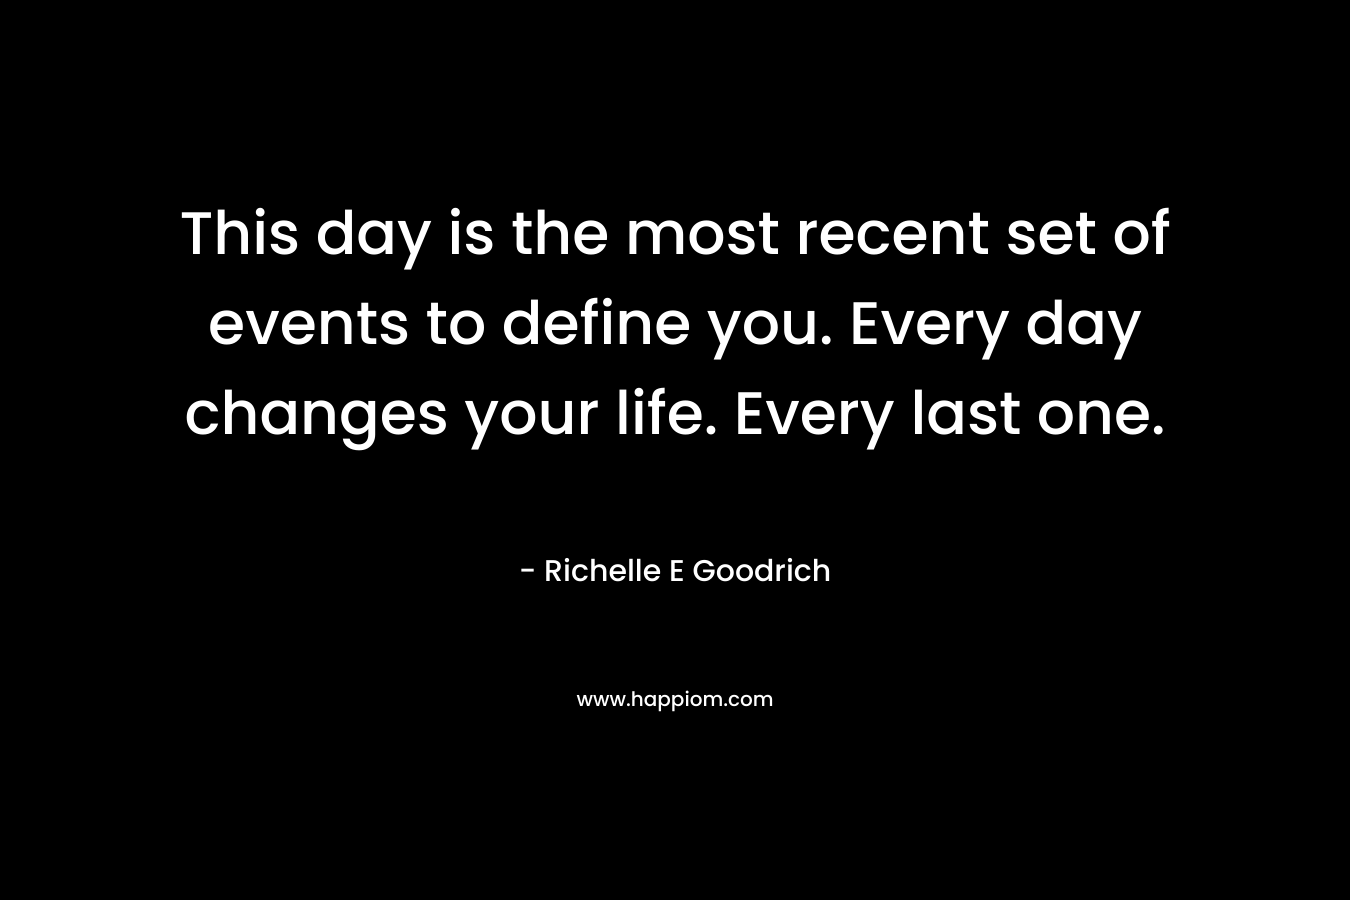 This day is the most recent set of events to define you. Every day changes your life. Every last one. – Richelle E Goodrich